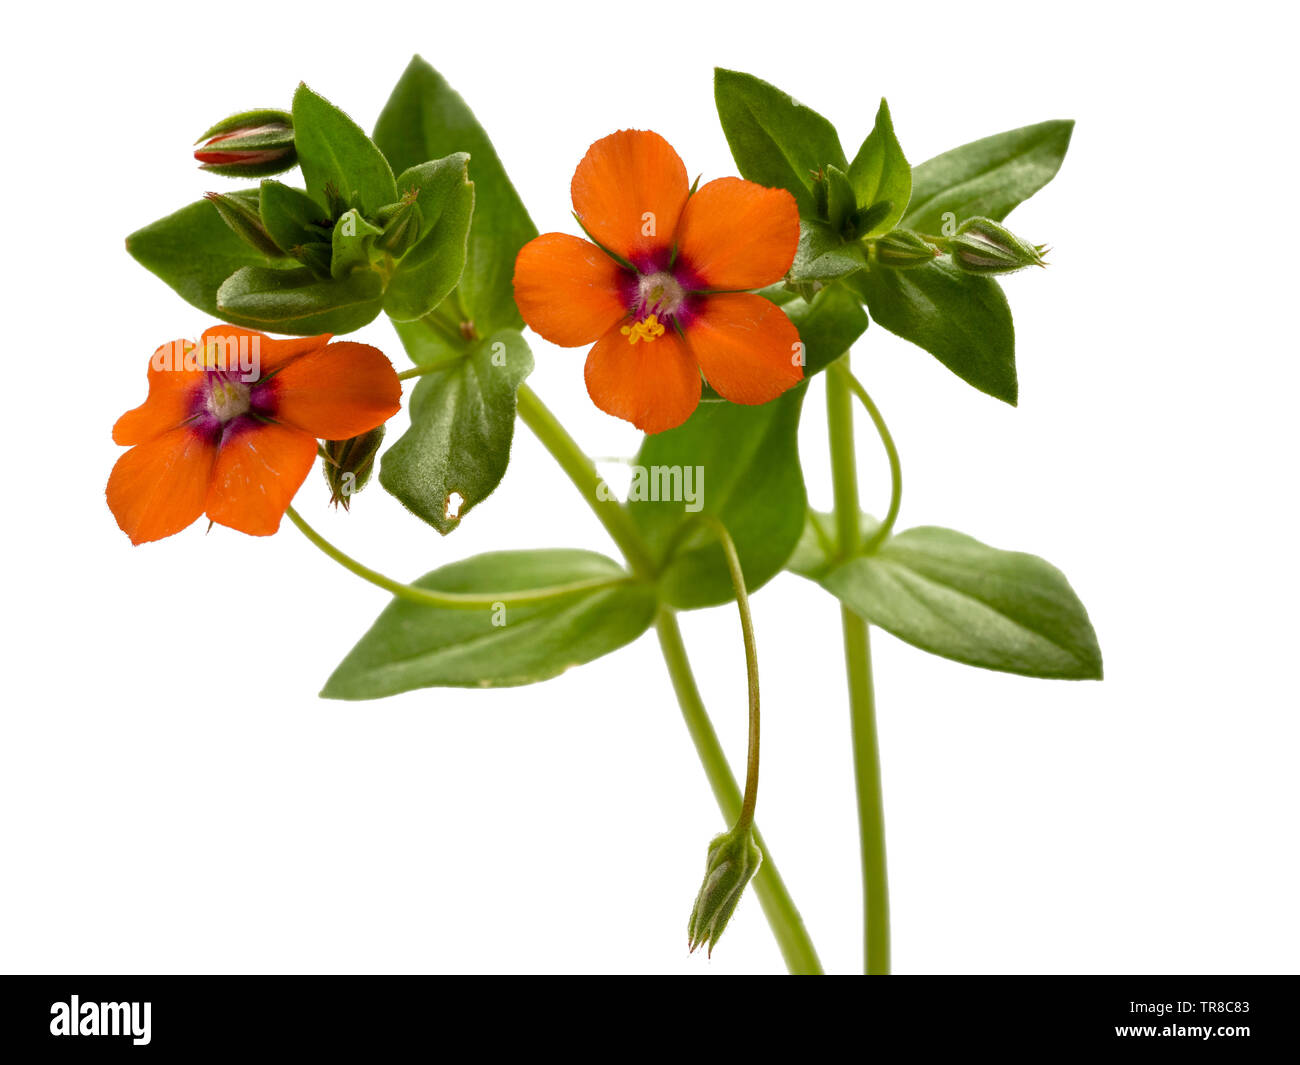 Foliage and red-orange flowers of the annual garden weed, Scarlet Pimpernel, Anagallis arvensis Stock Photo